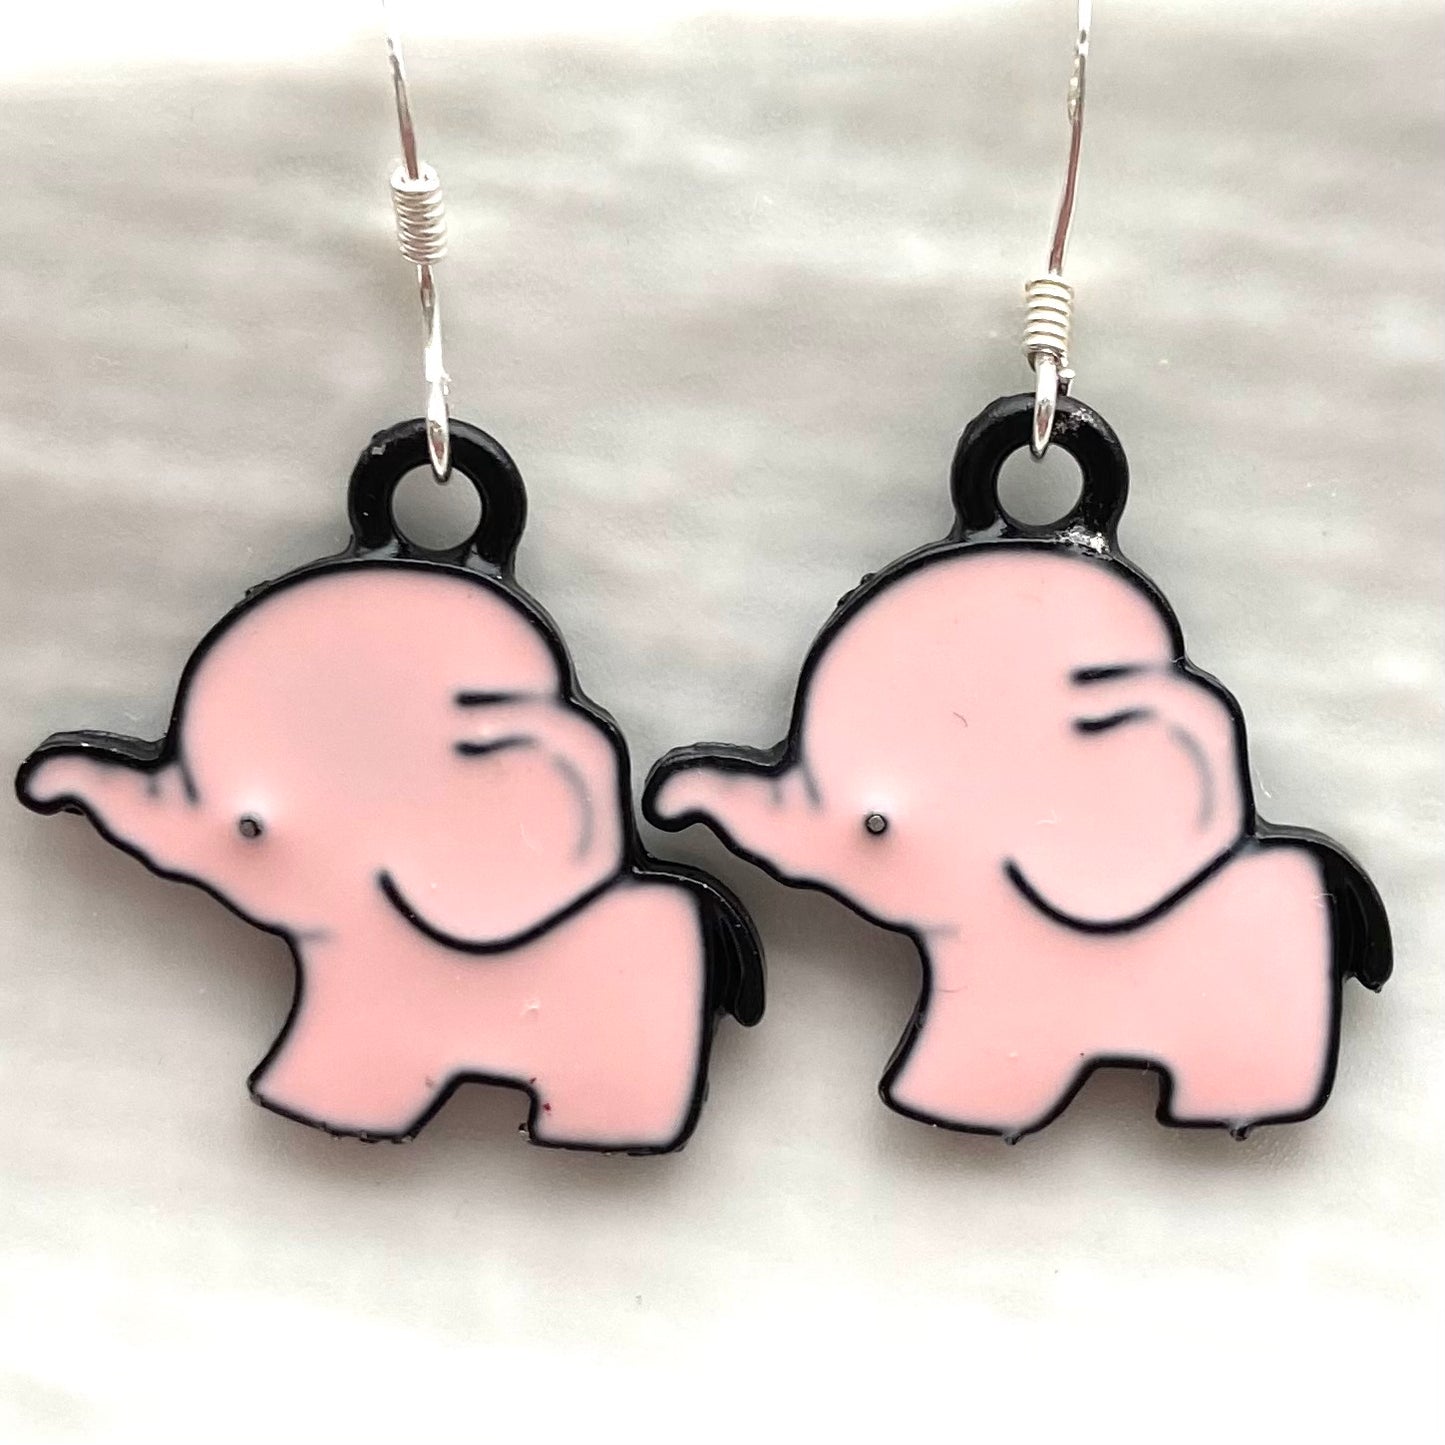 Handmade by Coco - baby Elephant earrings-(use drop down box to select colour)